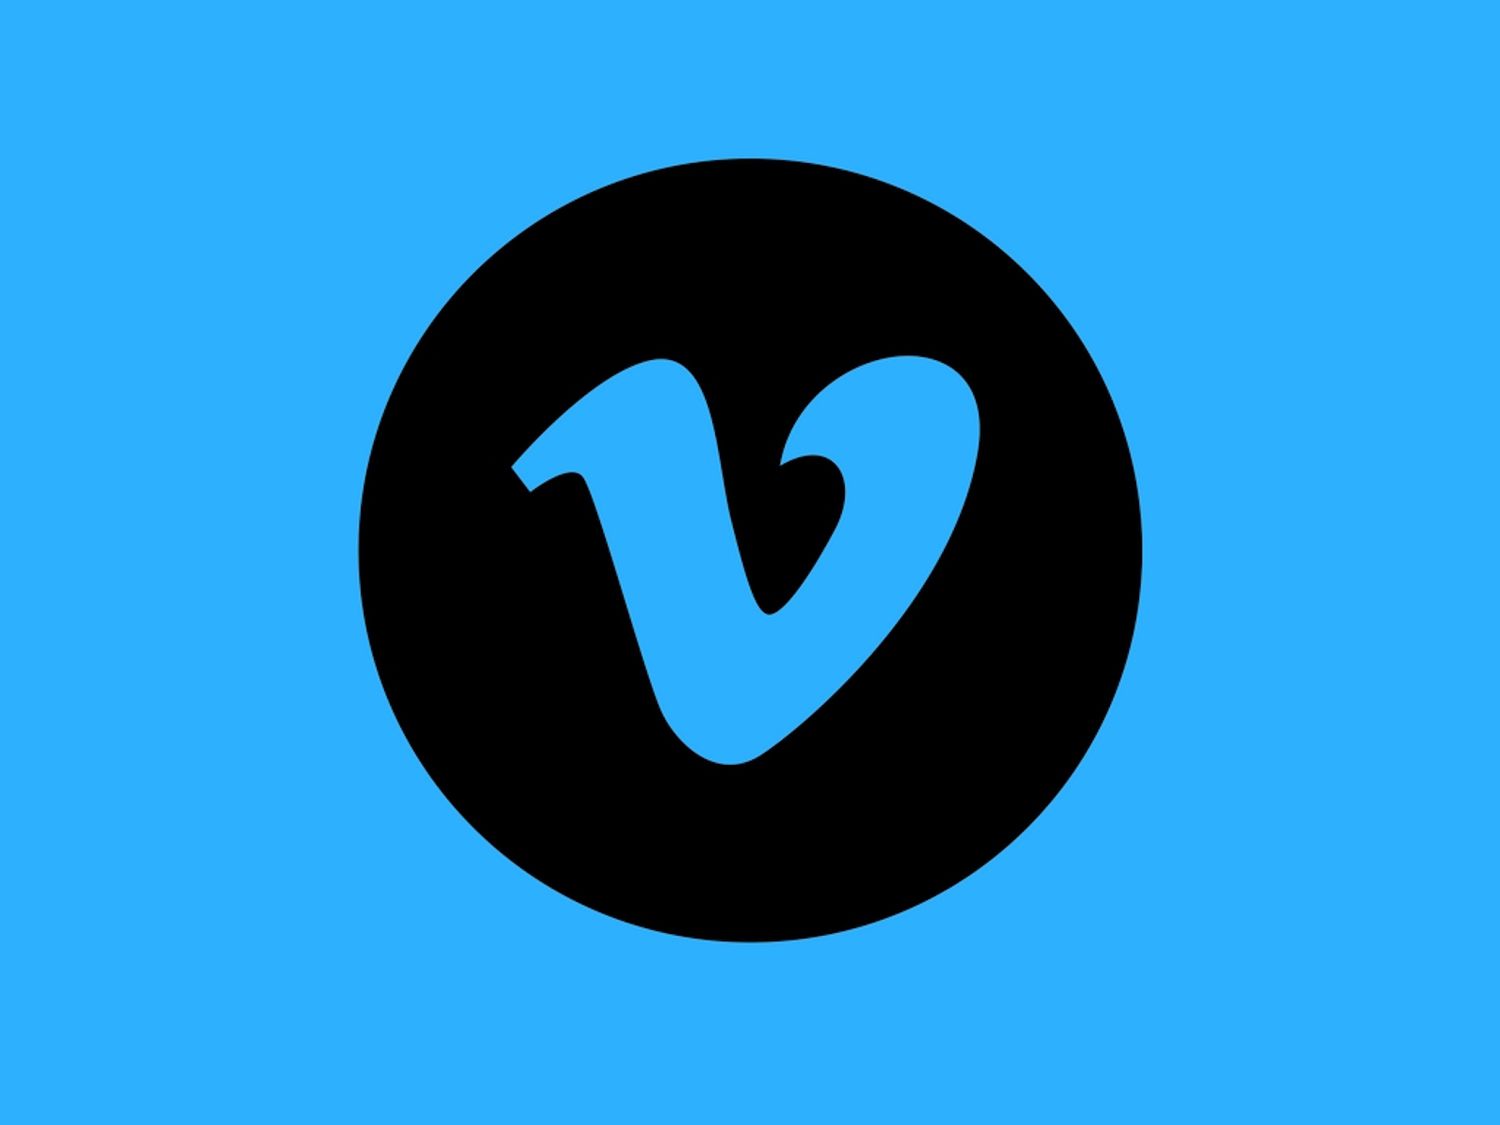 Vimeo: The Ultimate Guide to Video Creation, Marketing, and Distribution